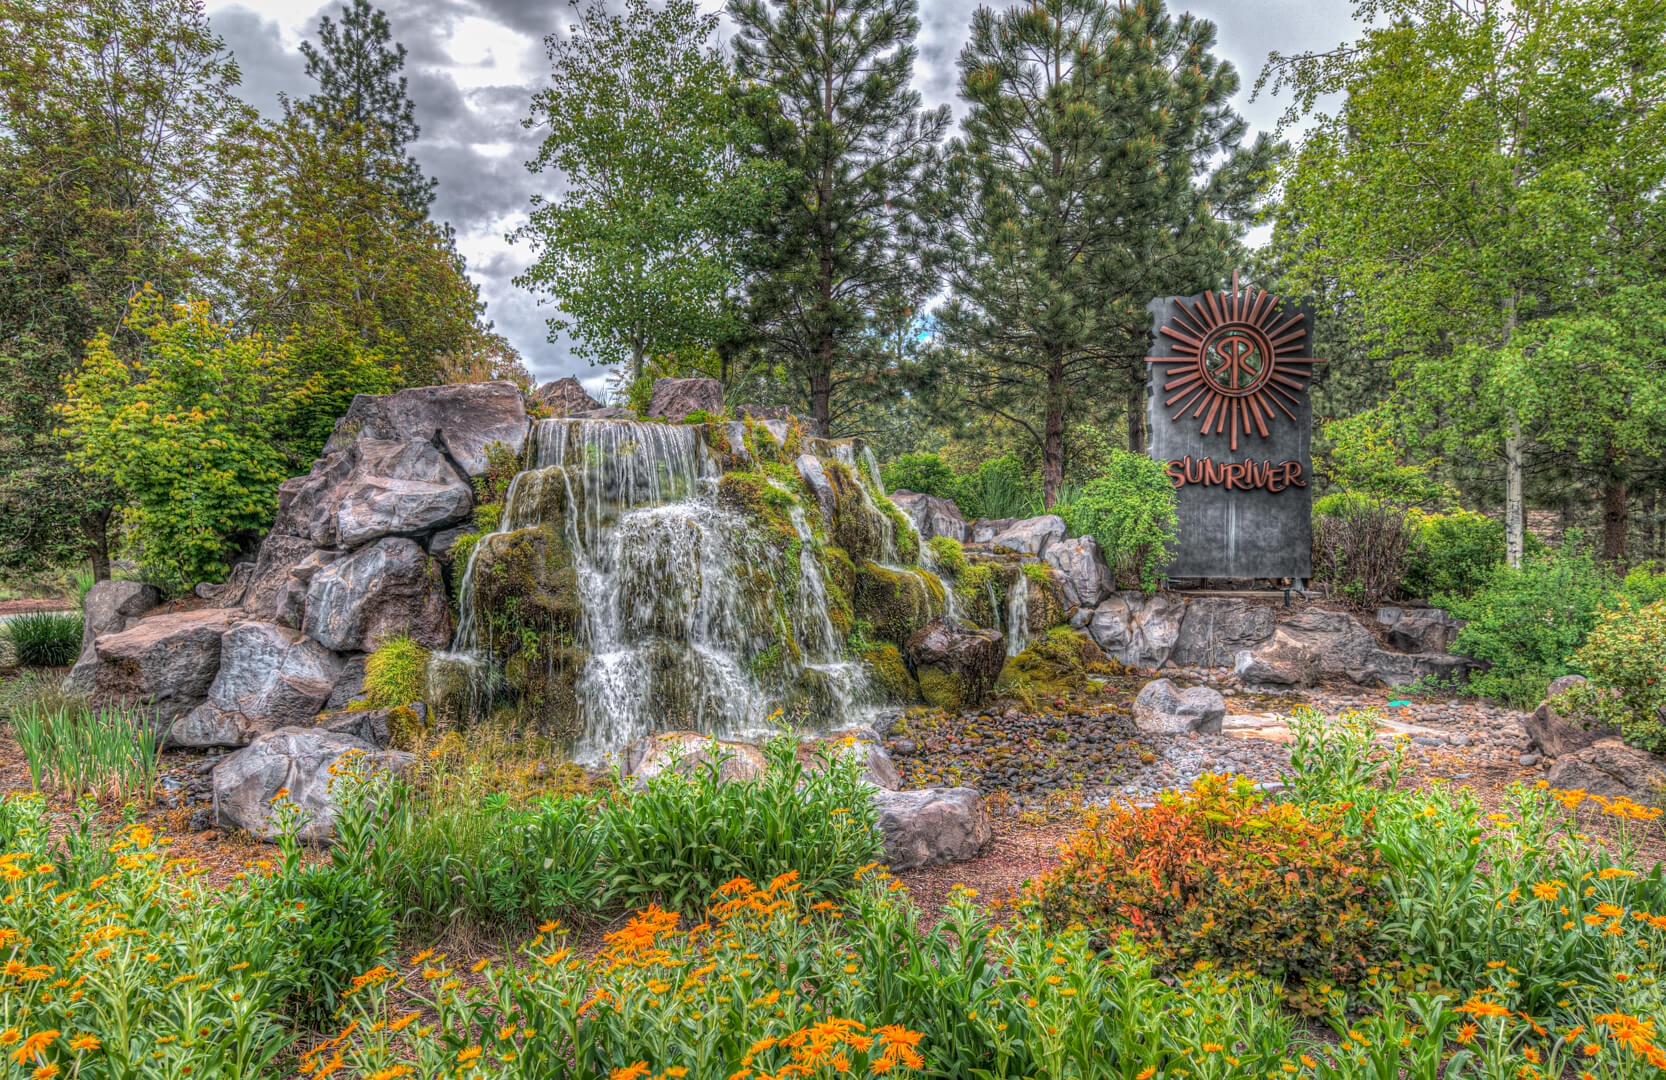 Sunriver - roundabout - entry